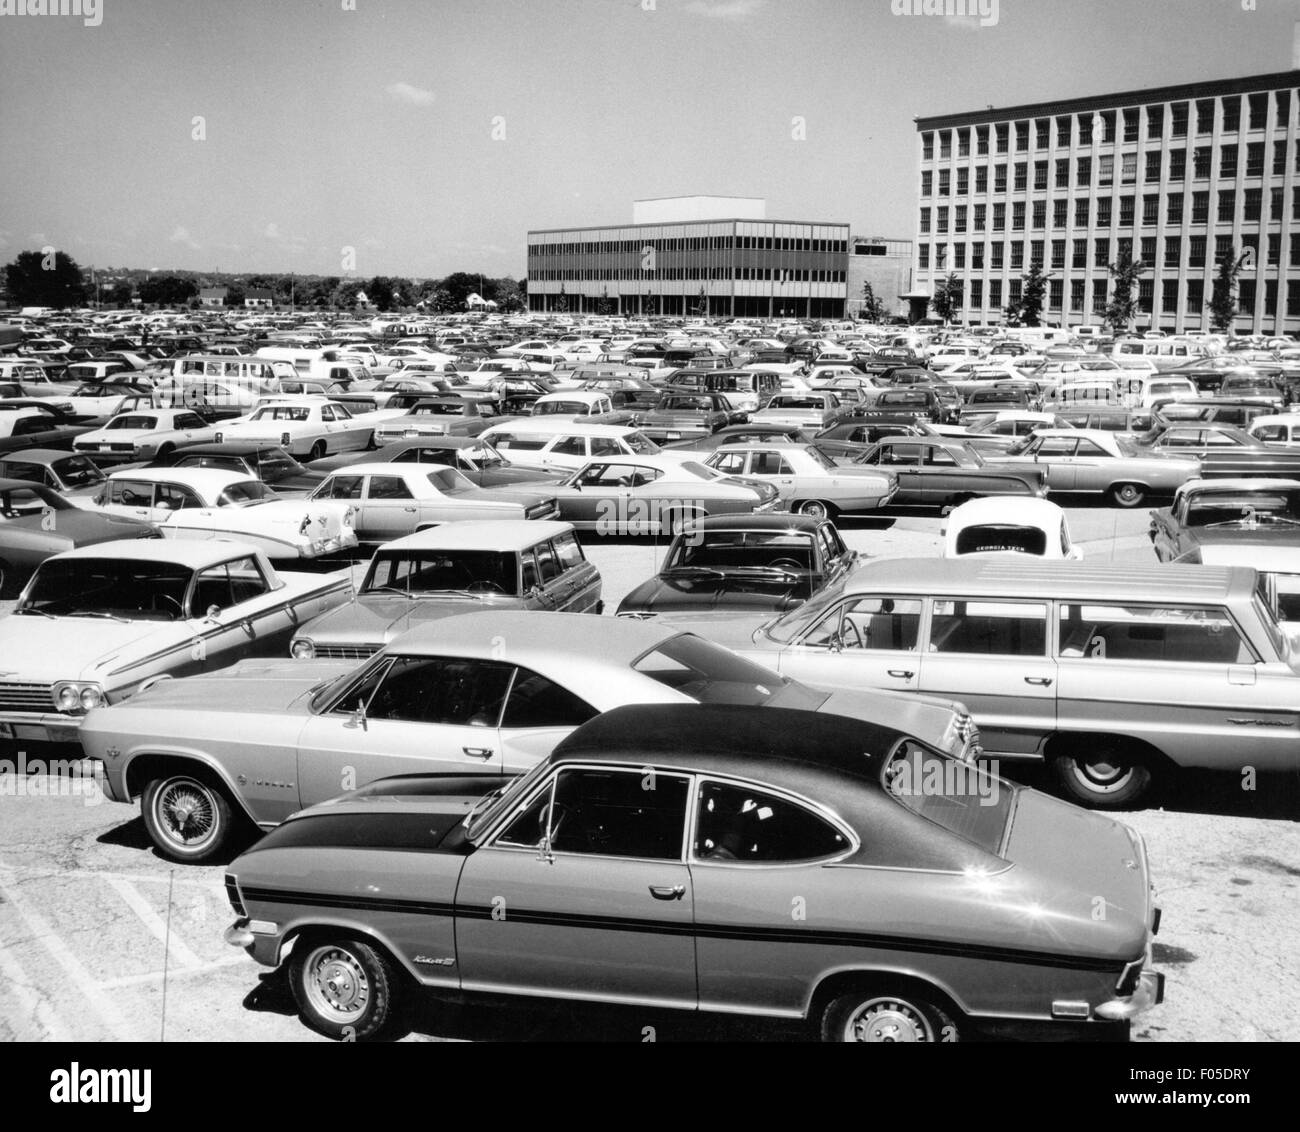 transport / transportation, car, parking, parking space, USA, late 1960s, Additional-Rights-Clearences-Not Available Stock Photo